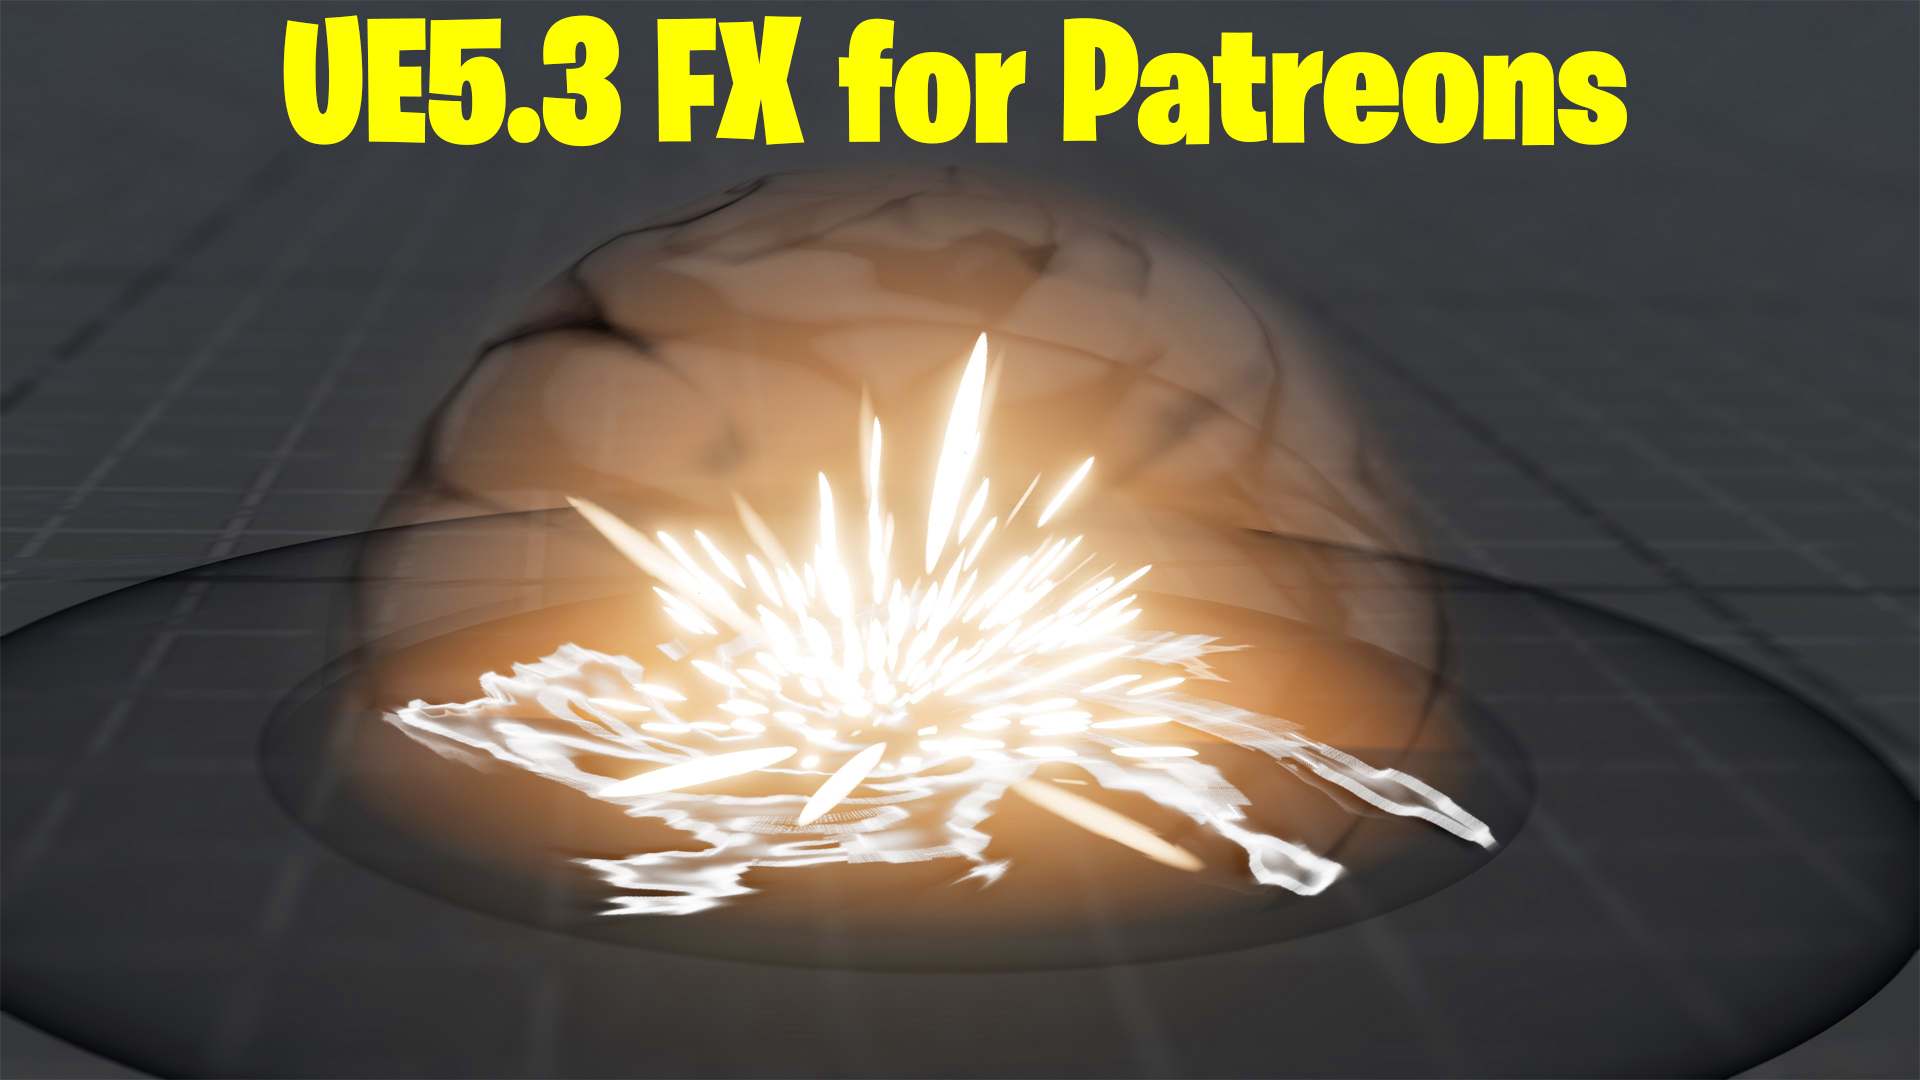 UE5.3 FX for Patreons